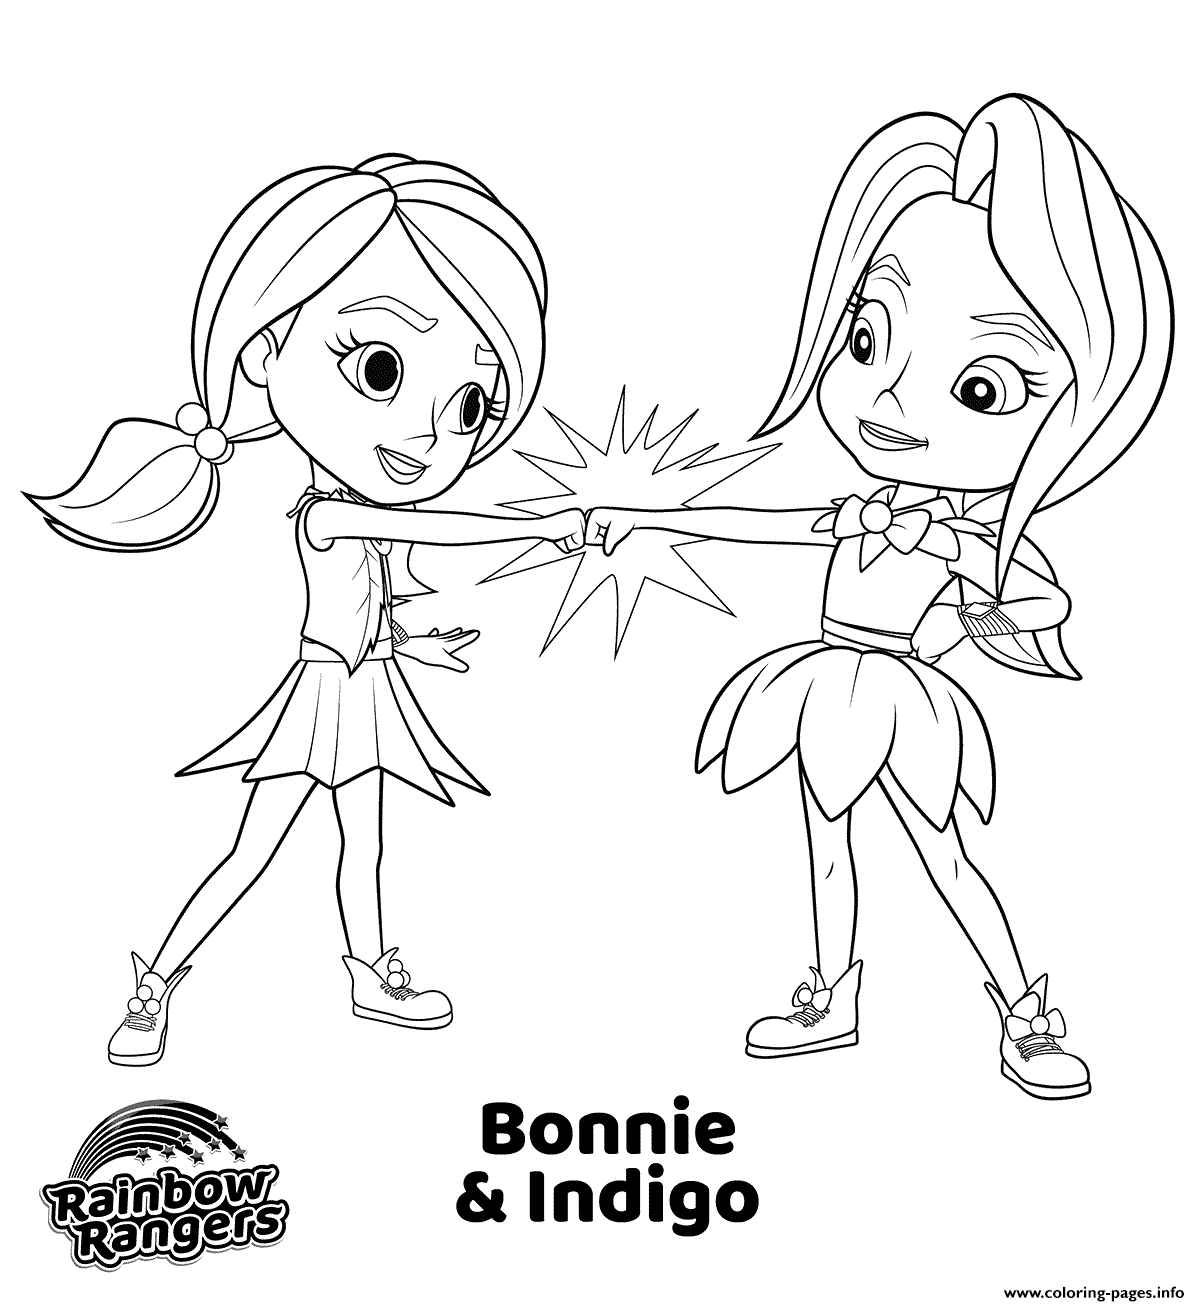 BFF From Rainbow Rangers Coloring page Printable